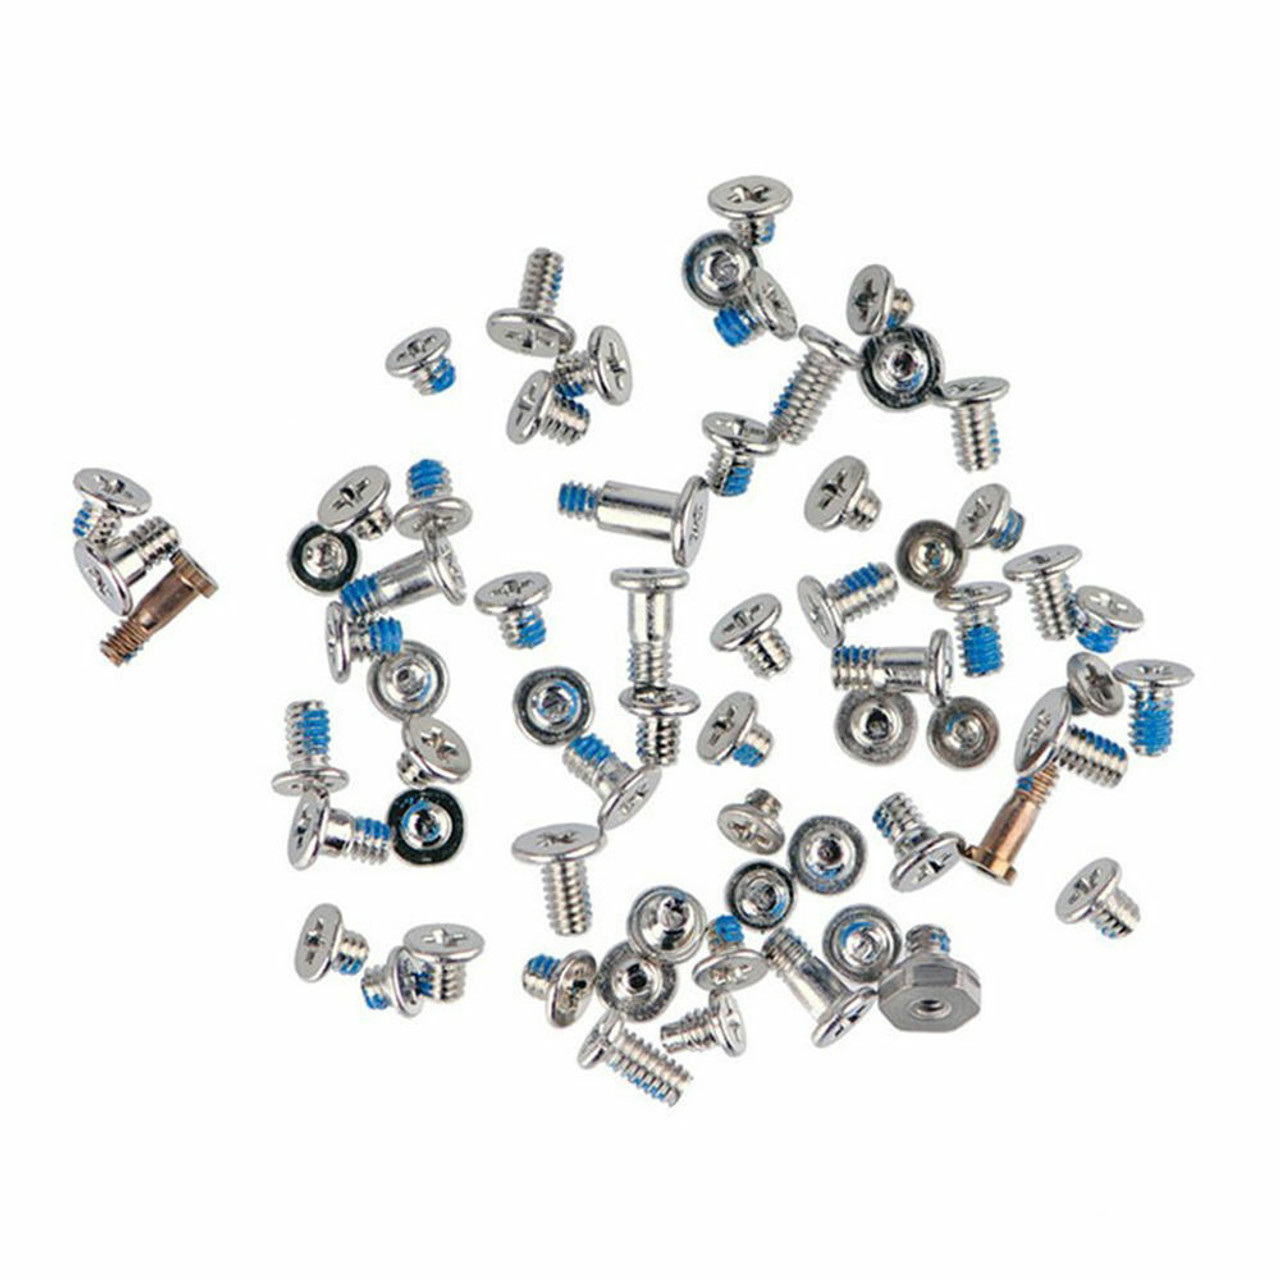 Replacement Screw Kit Set Full Complete Repair Assembly For iPhone 7 Plus 5.5"